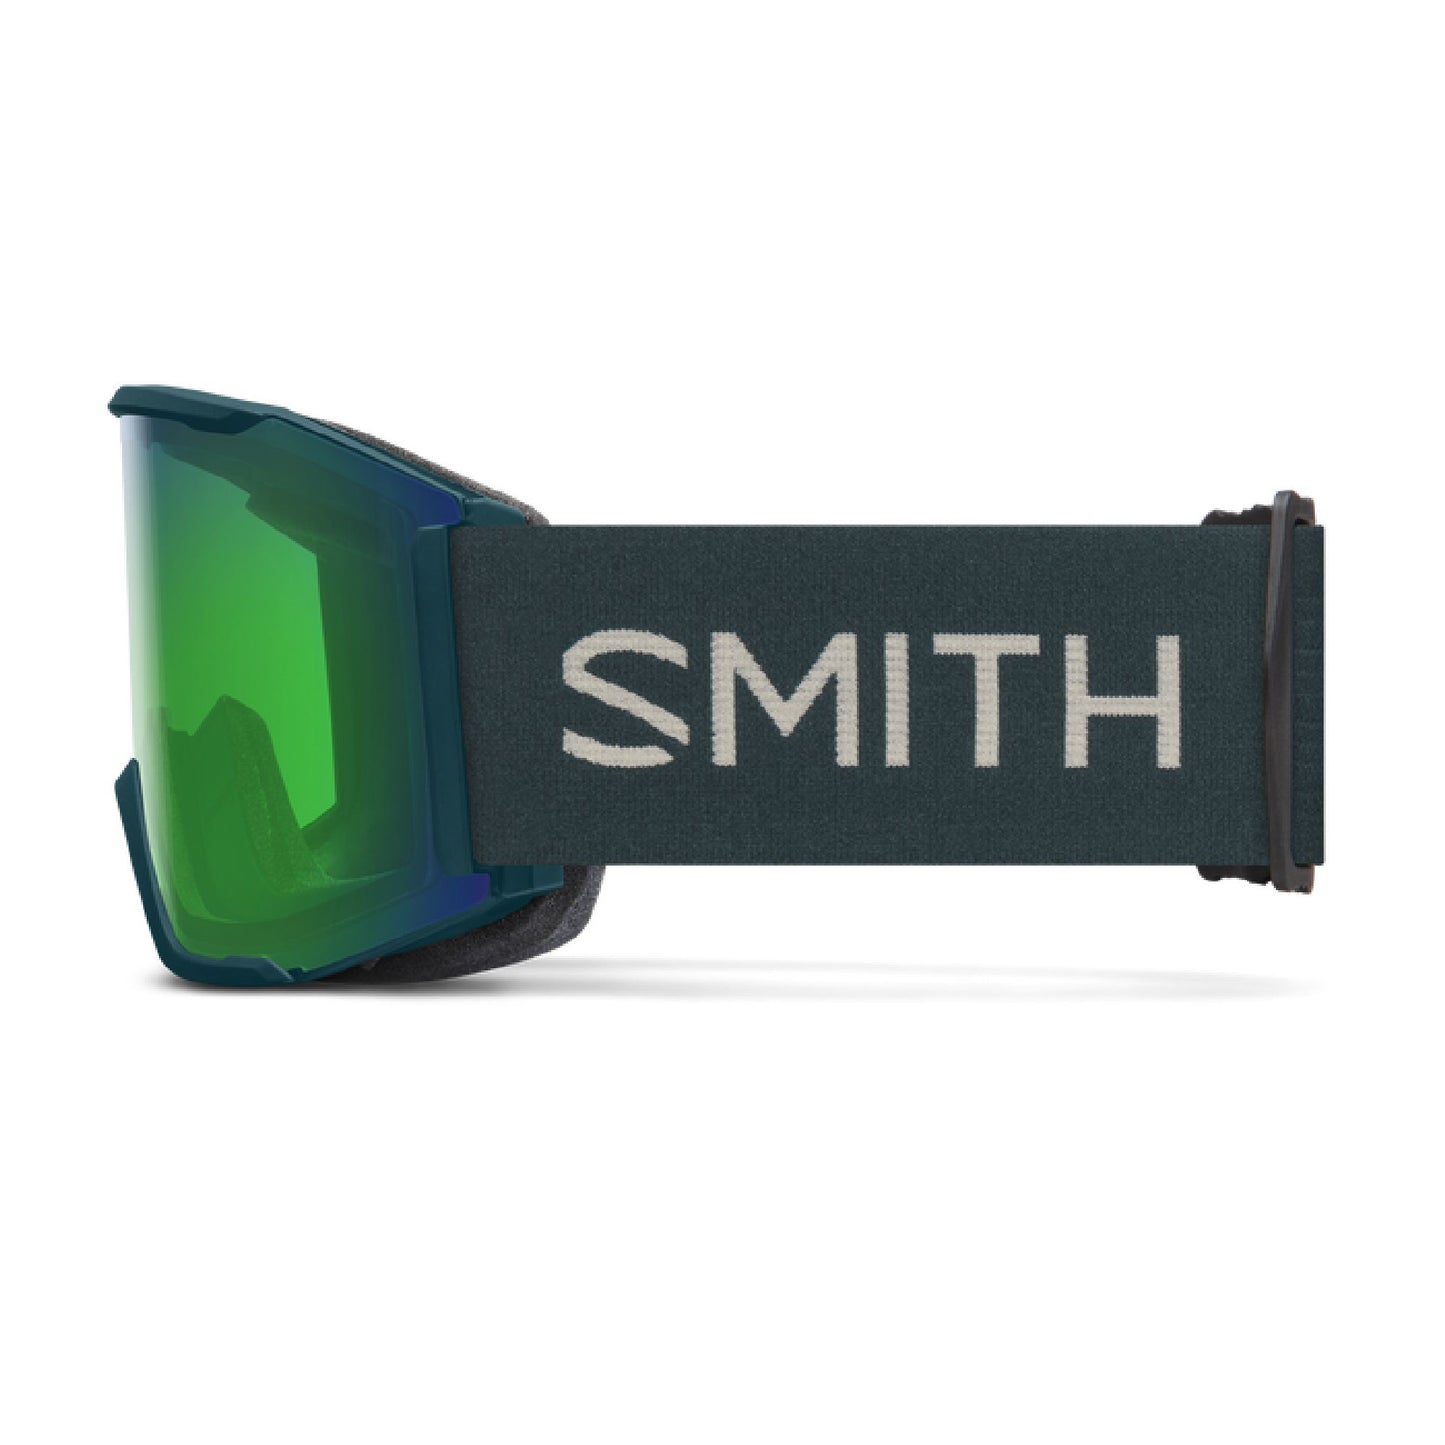 Smith Squad MAG Snow Goggle Pacific Flow / ChromaPop Everyday Green Mirror Snow Goggles